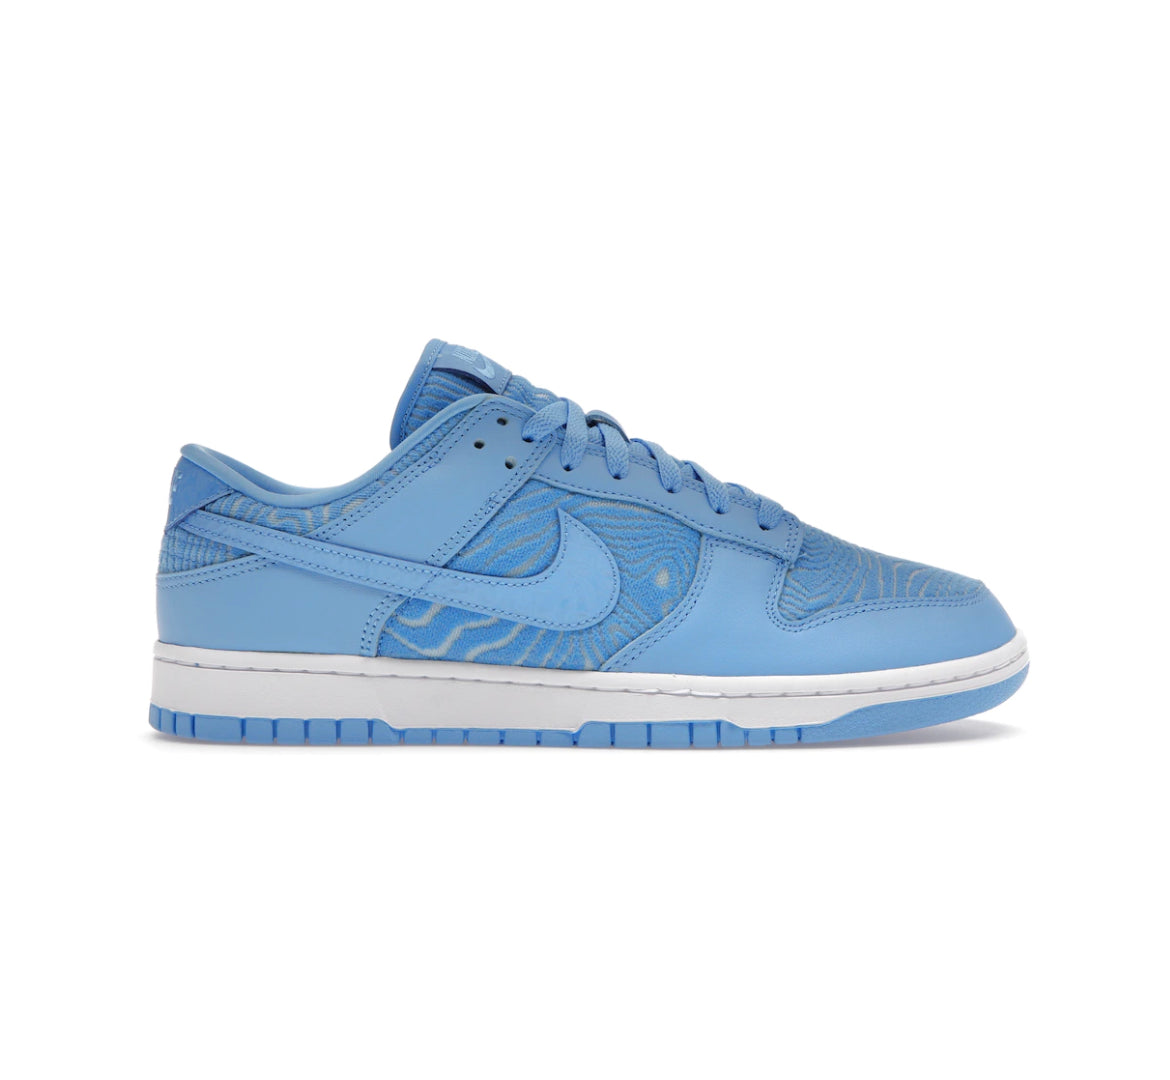 Dunk Low Topography University Blue FN6834-412